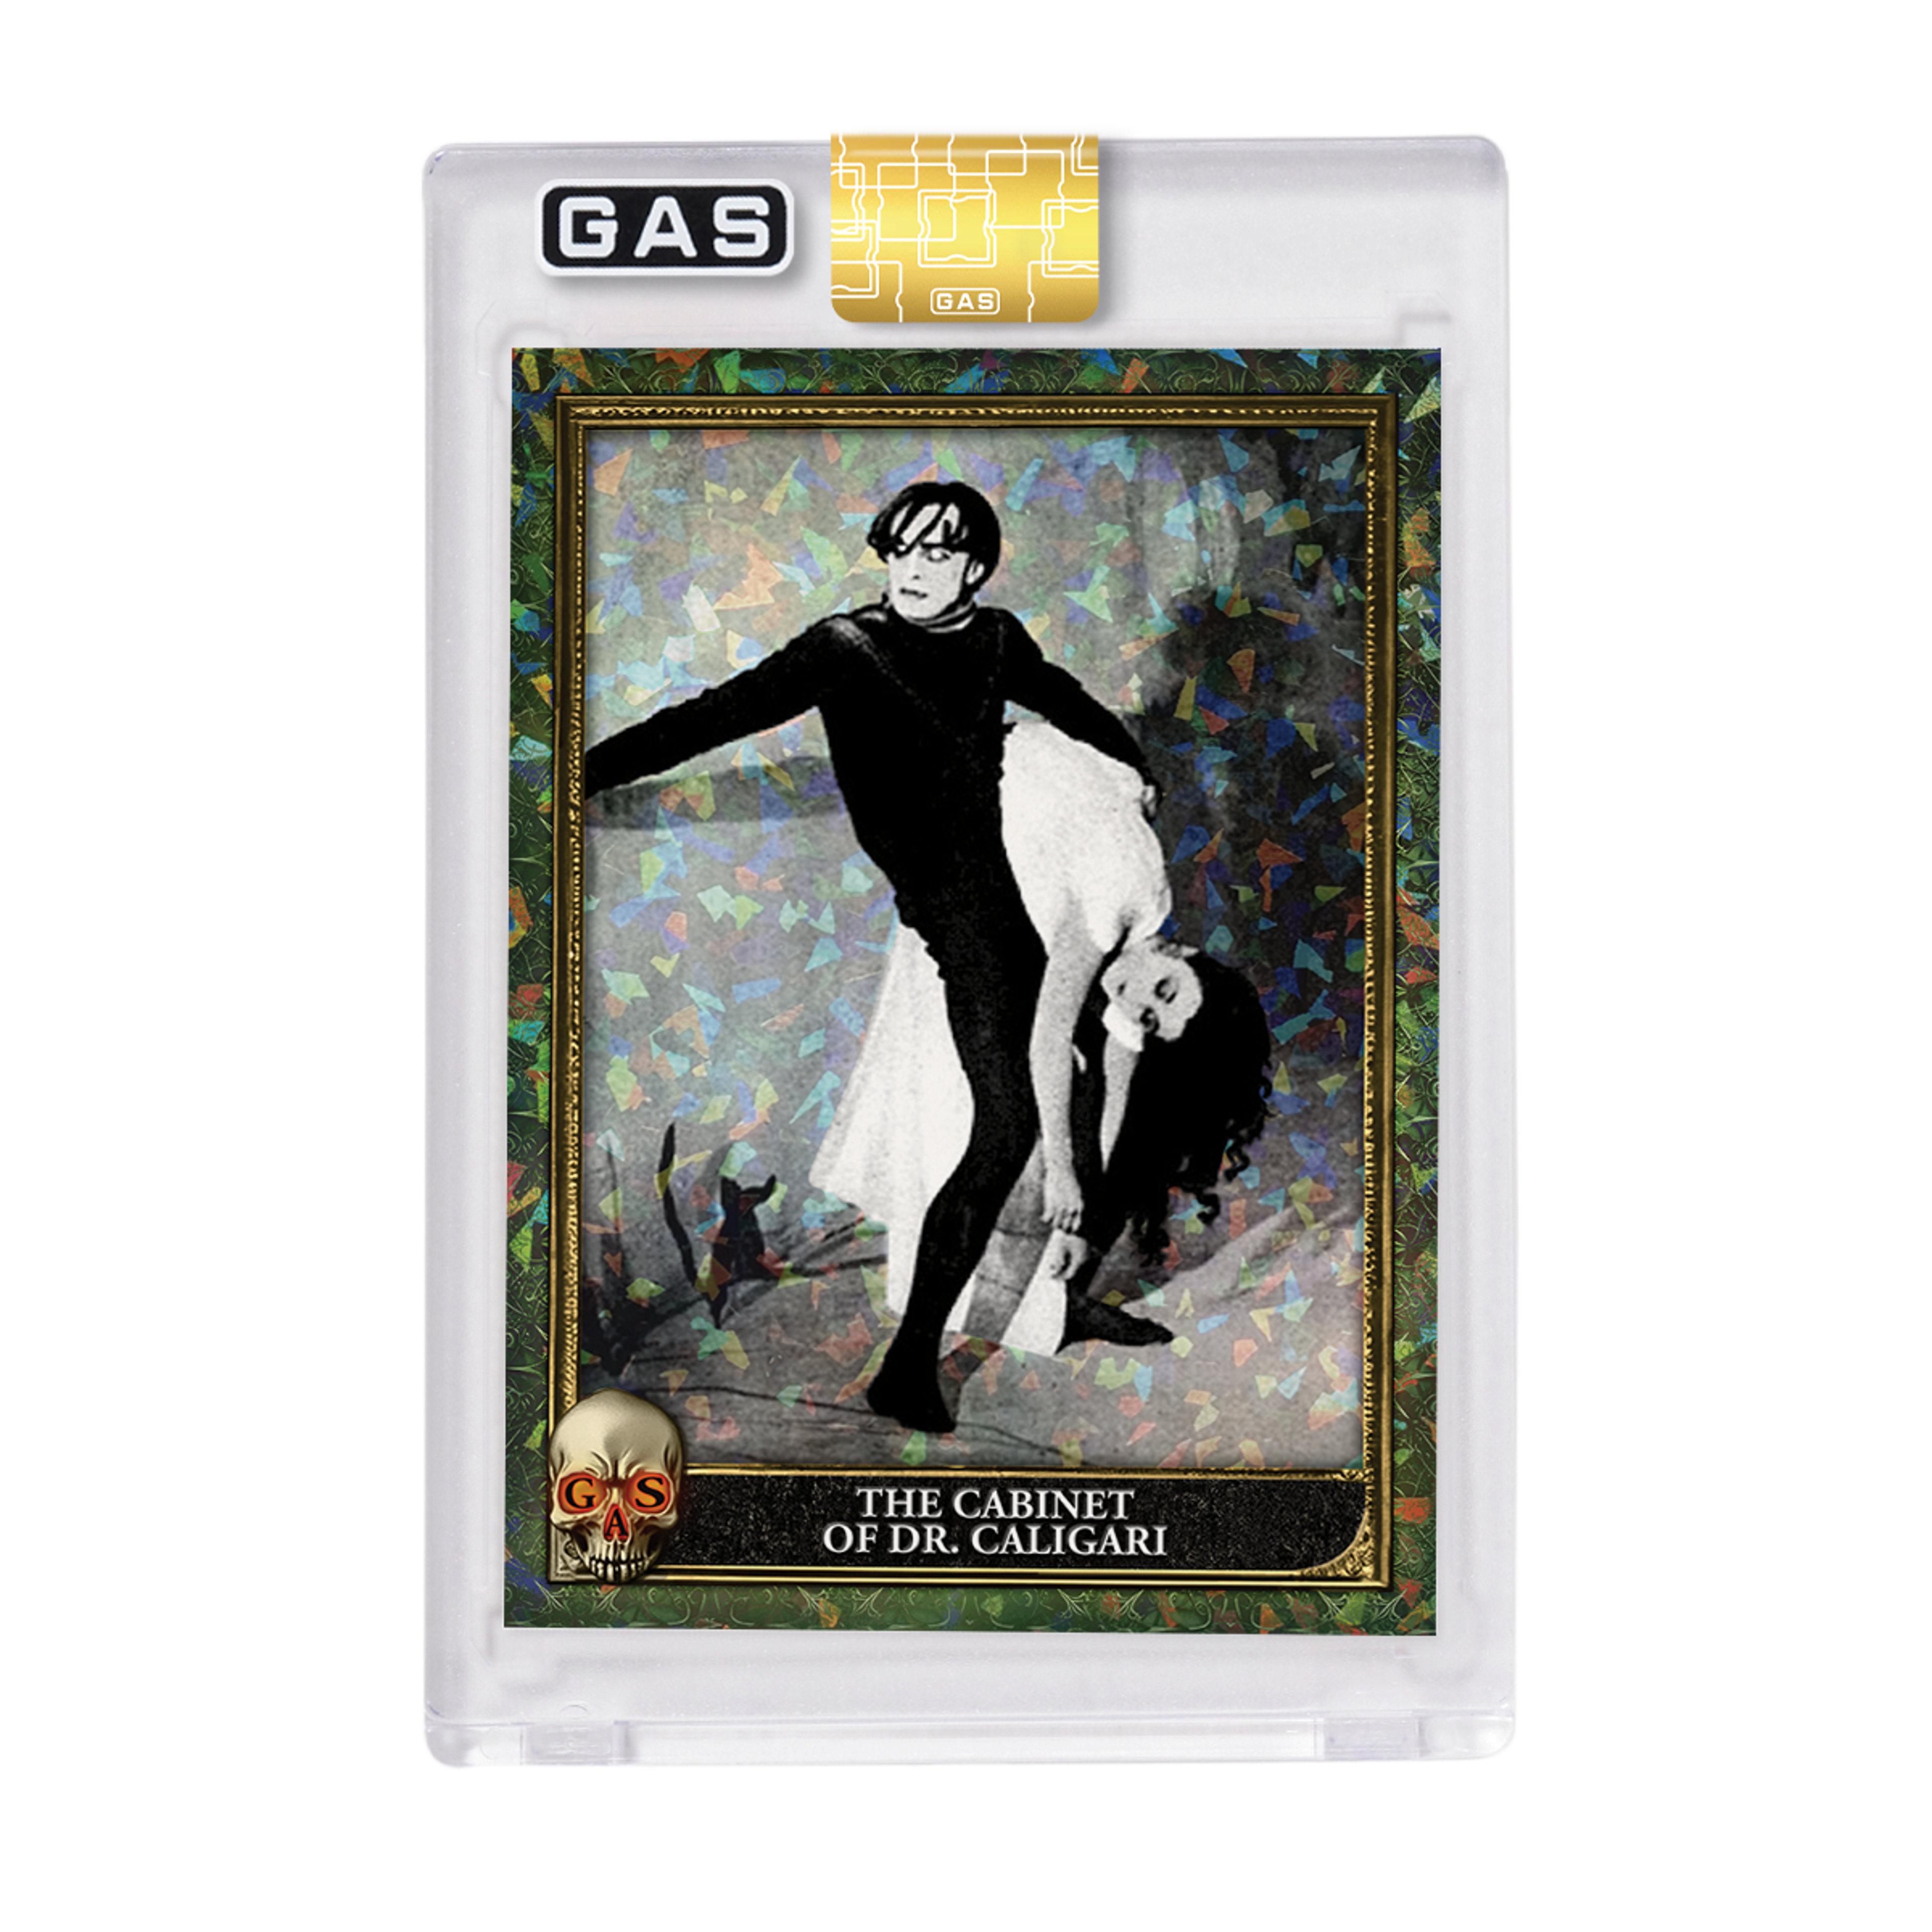 Limited Edition GAS Horror #2 The Cabinet of Dr. Caligari Cracke